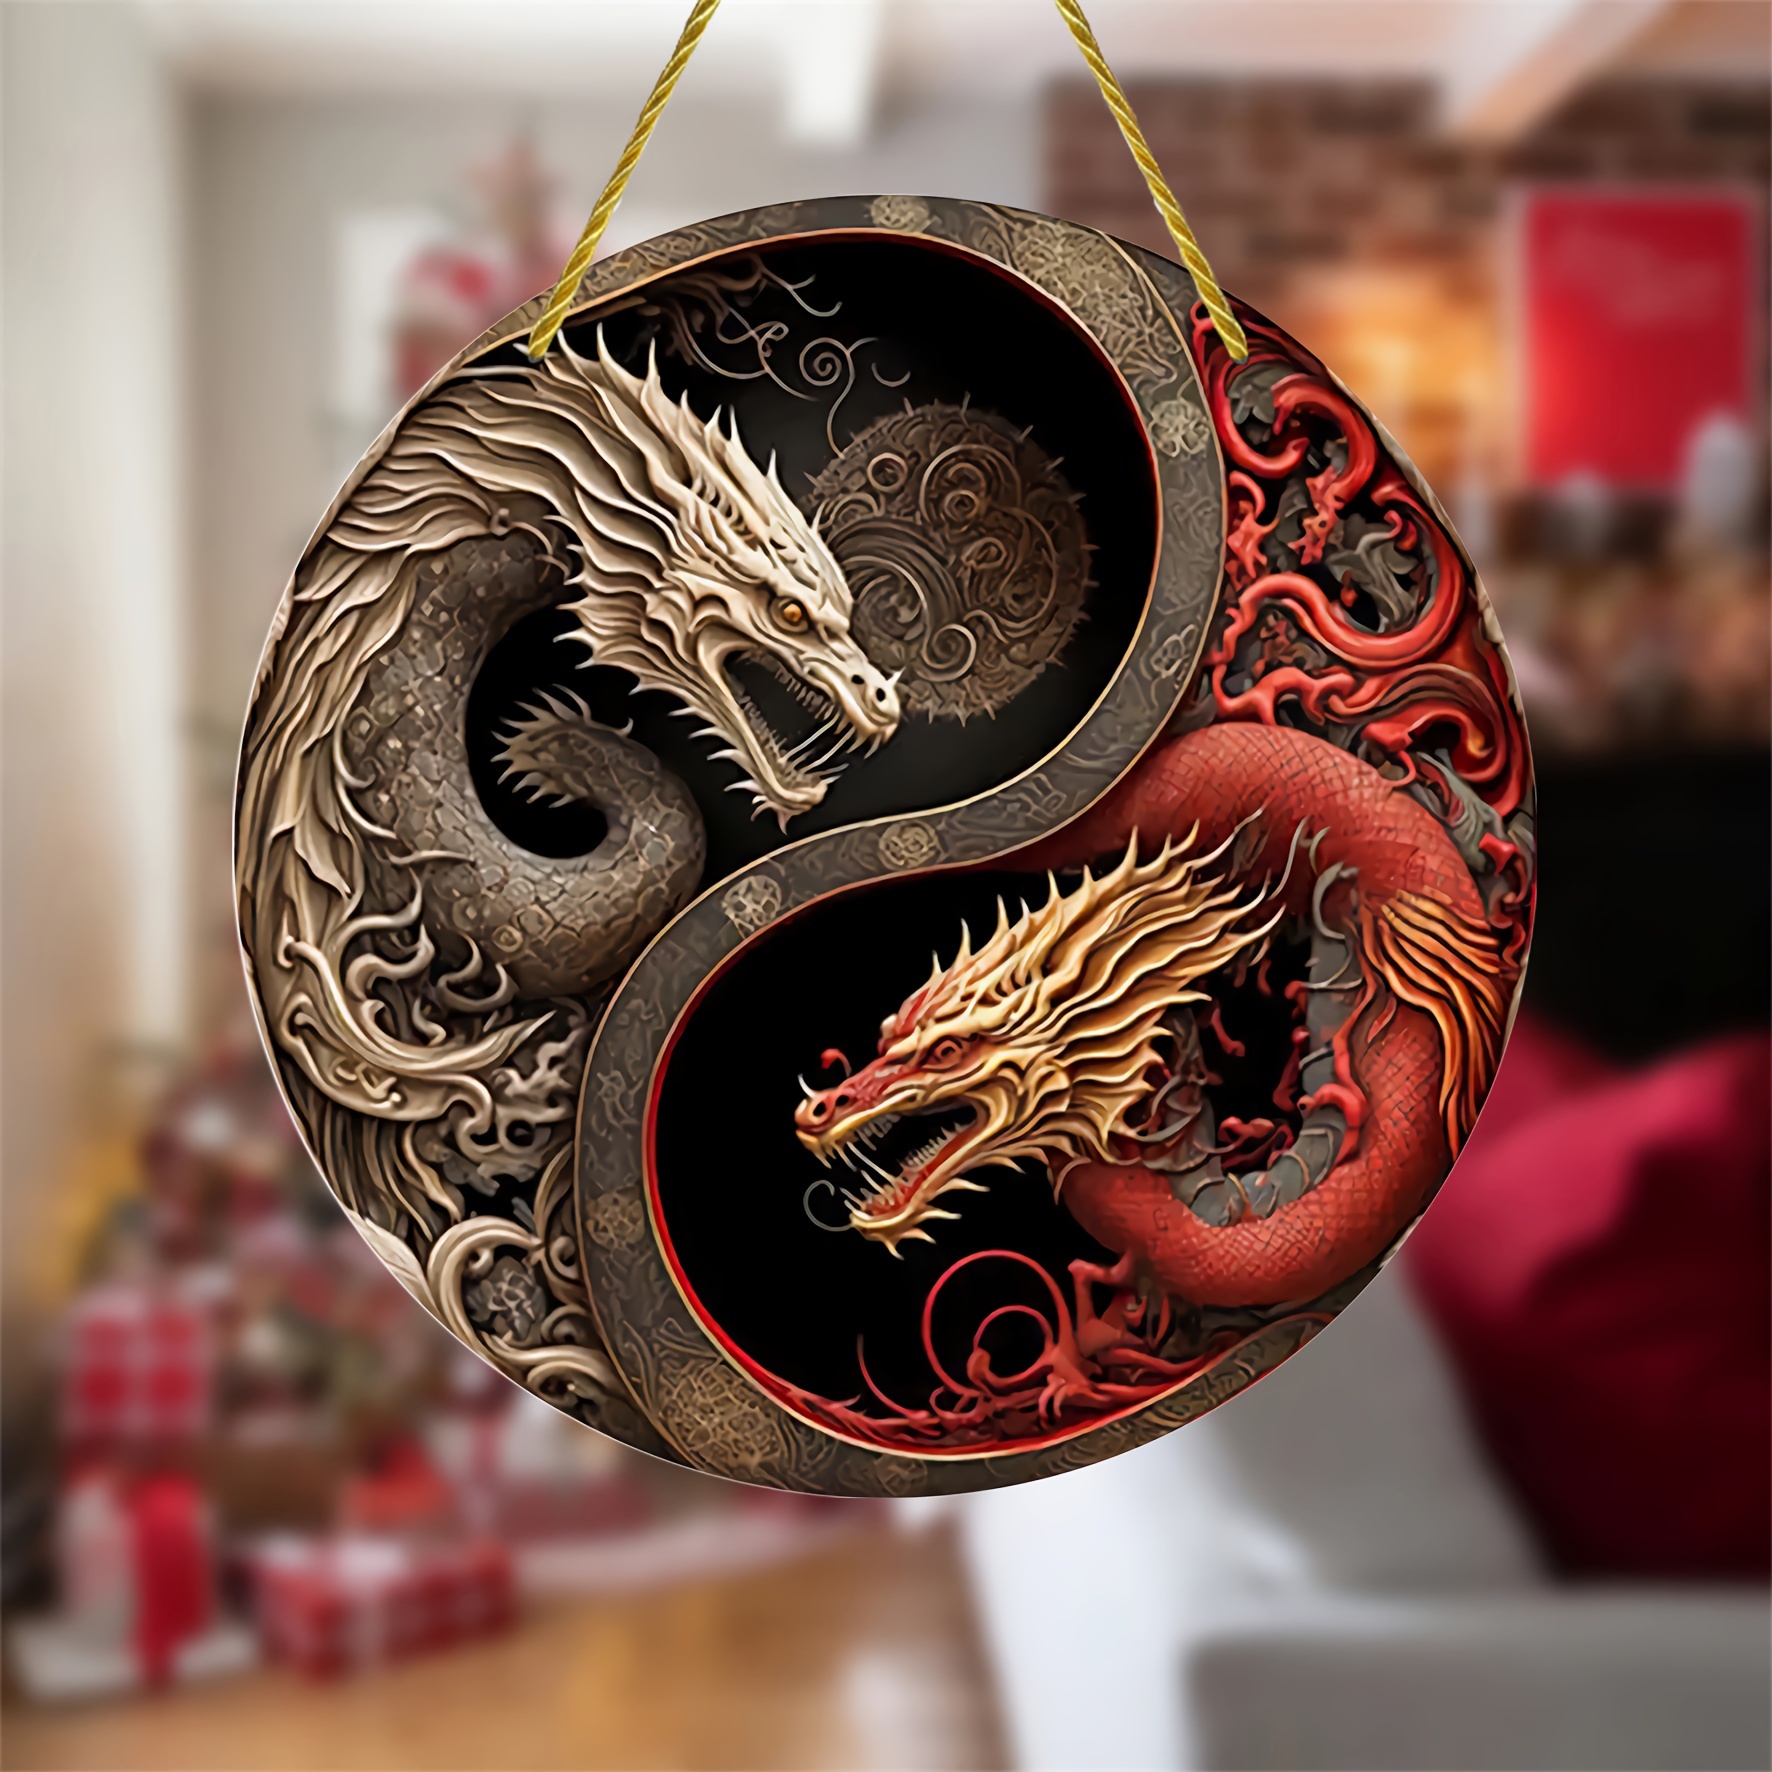 1pc Beautiful Flying Dragon - Window Hanging Light Catcher Decoration,  Suitable For Room, Living Room, Garden, Office, Scene Decor, Room Decor,  Home D